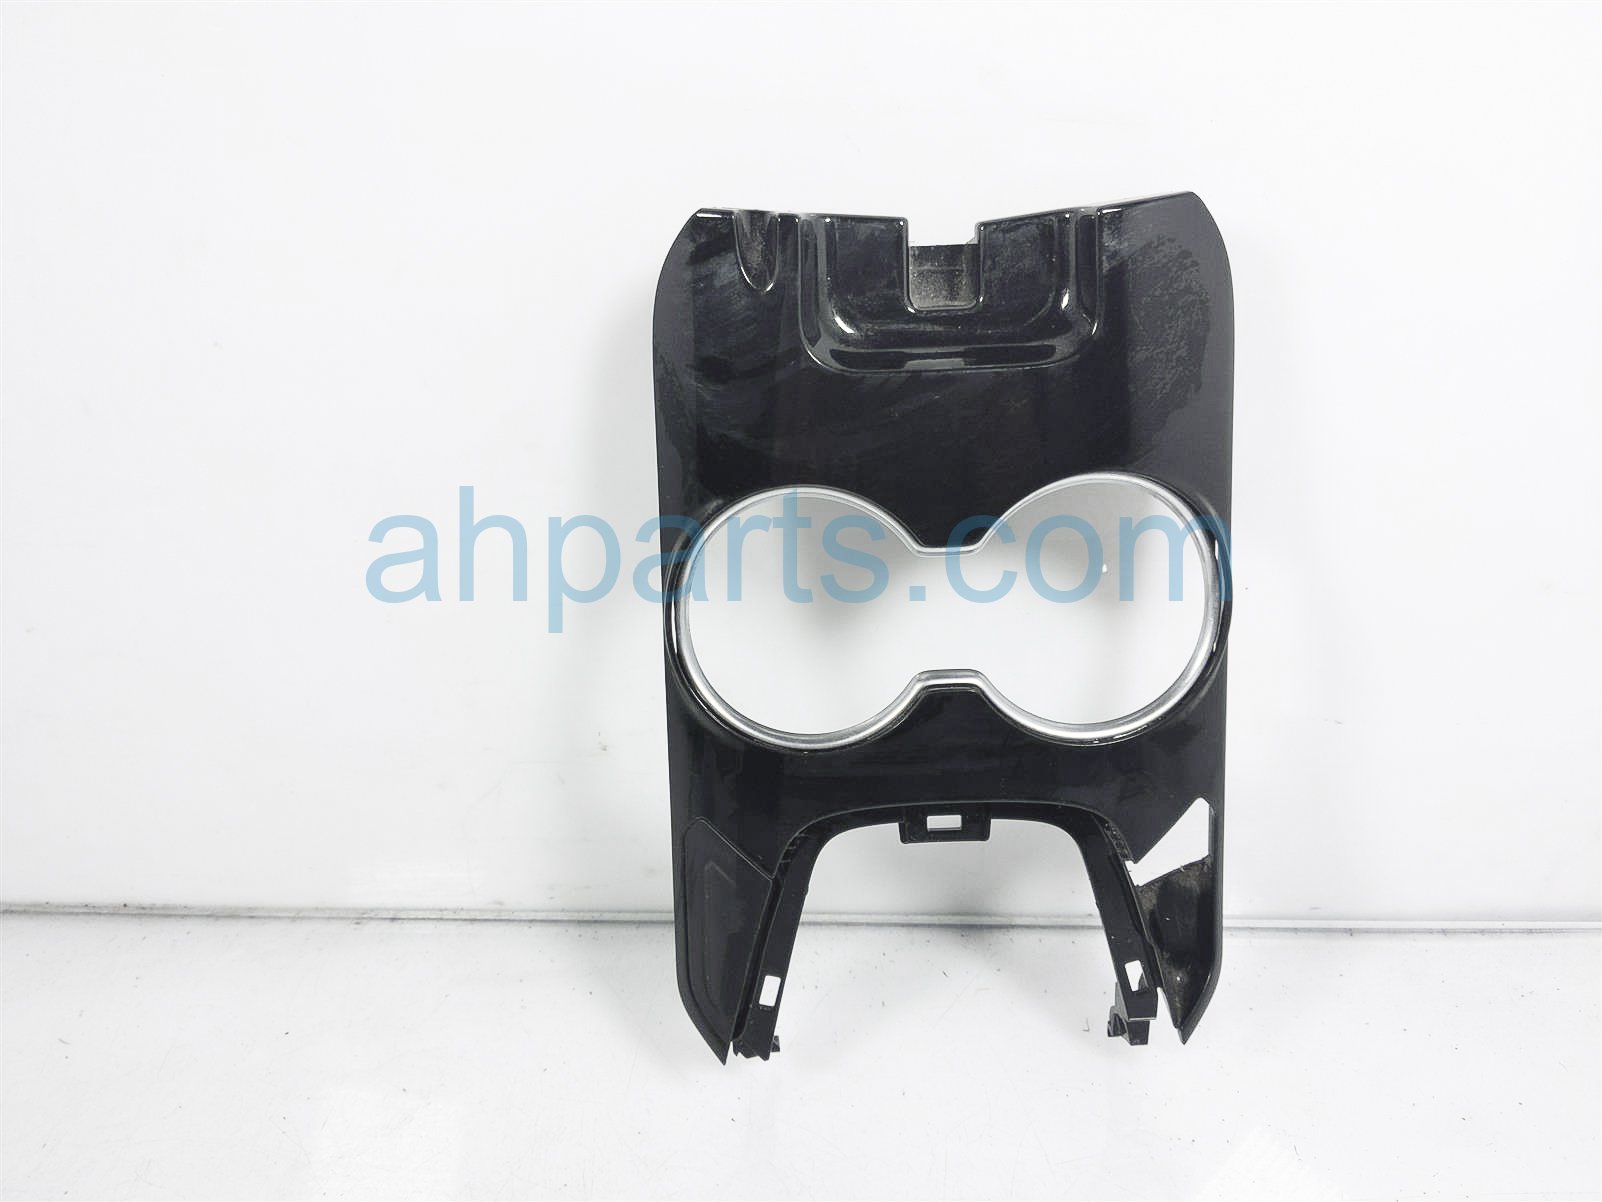 $50 Ford CENTER CONSOLE CUP HOLDER TRIM BEZEL